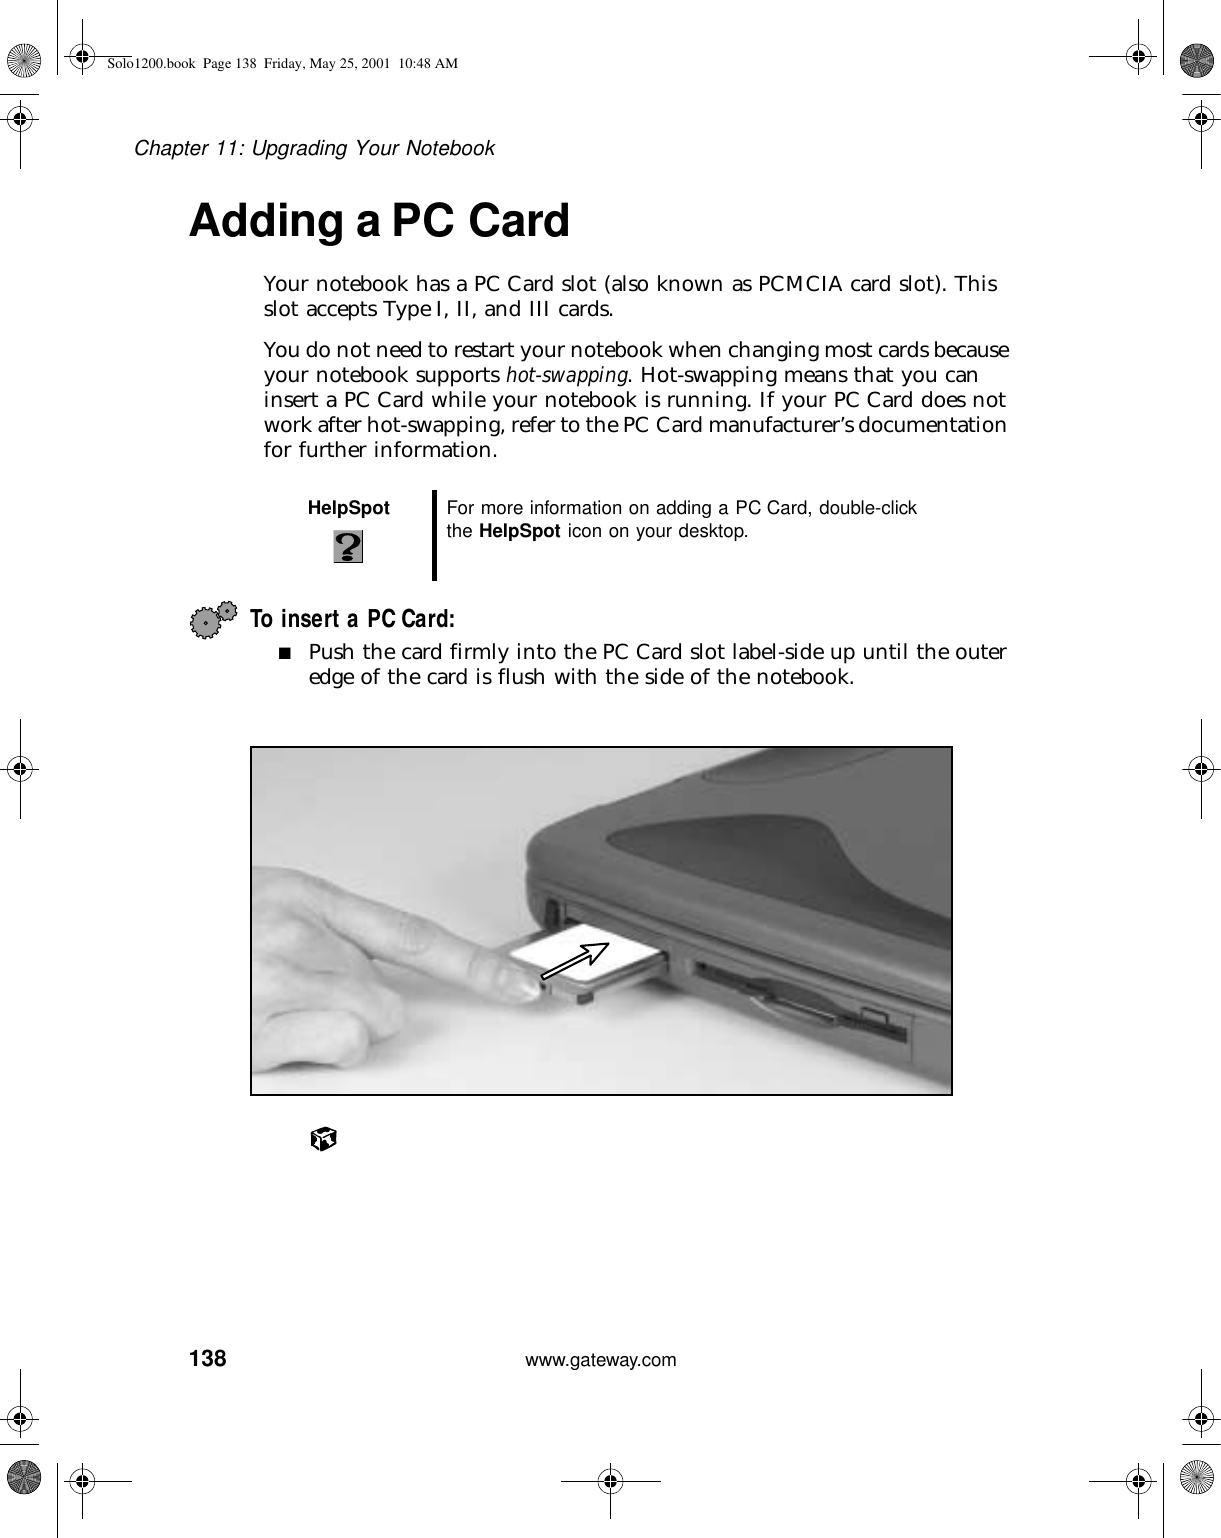 138Chapter 11: Upgrading Your Notebookwww.gateway.comAdding a PC CardYour notebook has a PC Card slot (also known as PCMCIA card slot). This slot accepts Type I, II, and III cards.You do not need to restart your notebook when changing most cards because your notebook supports hot-swapping. Hot-swapping means that you can insert a PC Card while your notebook is running. If your PC Card does not work after hot-swapping, refer to the PC Card manufacturer’s documentation for further information.To insert a PC Card:■Push the card firmly into the PC Card slot label-side up until the outer edge of the card is flush with the side of the notebook.HelpSpot For more information on adding a PC Card, double-click the HelpSpot icon on your desktop.Solo1200.book Page 138 Friday, May 25, 2001 10:48 AM